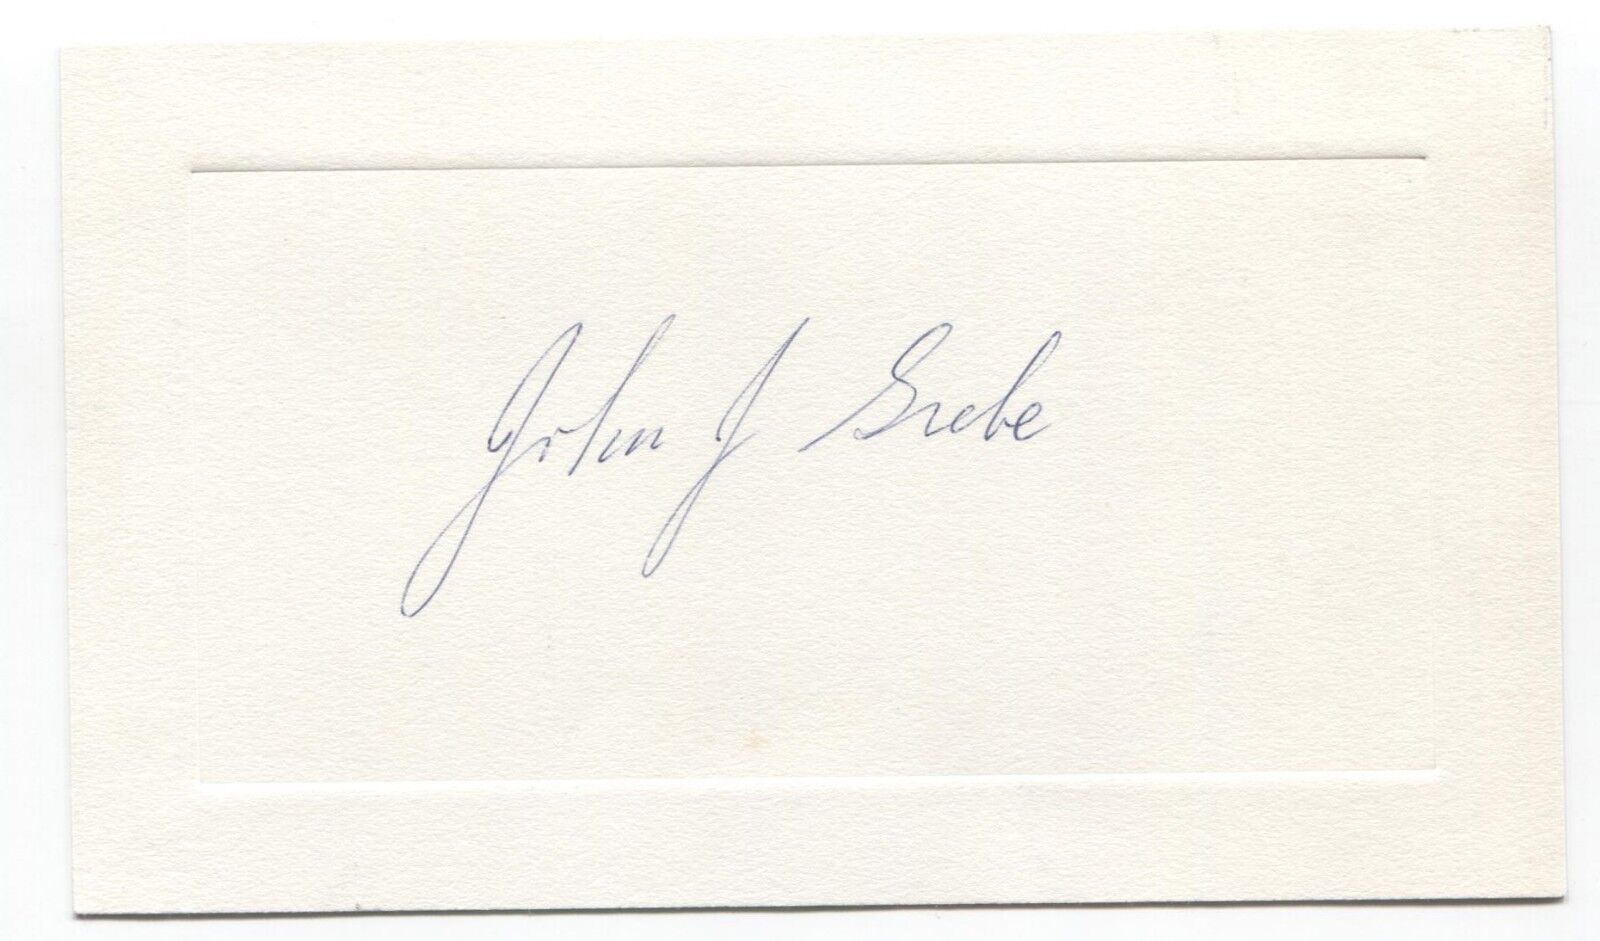 John Grebe Signed Card Autographed Signature Physicist at Dow Chemical